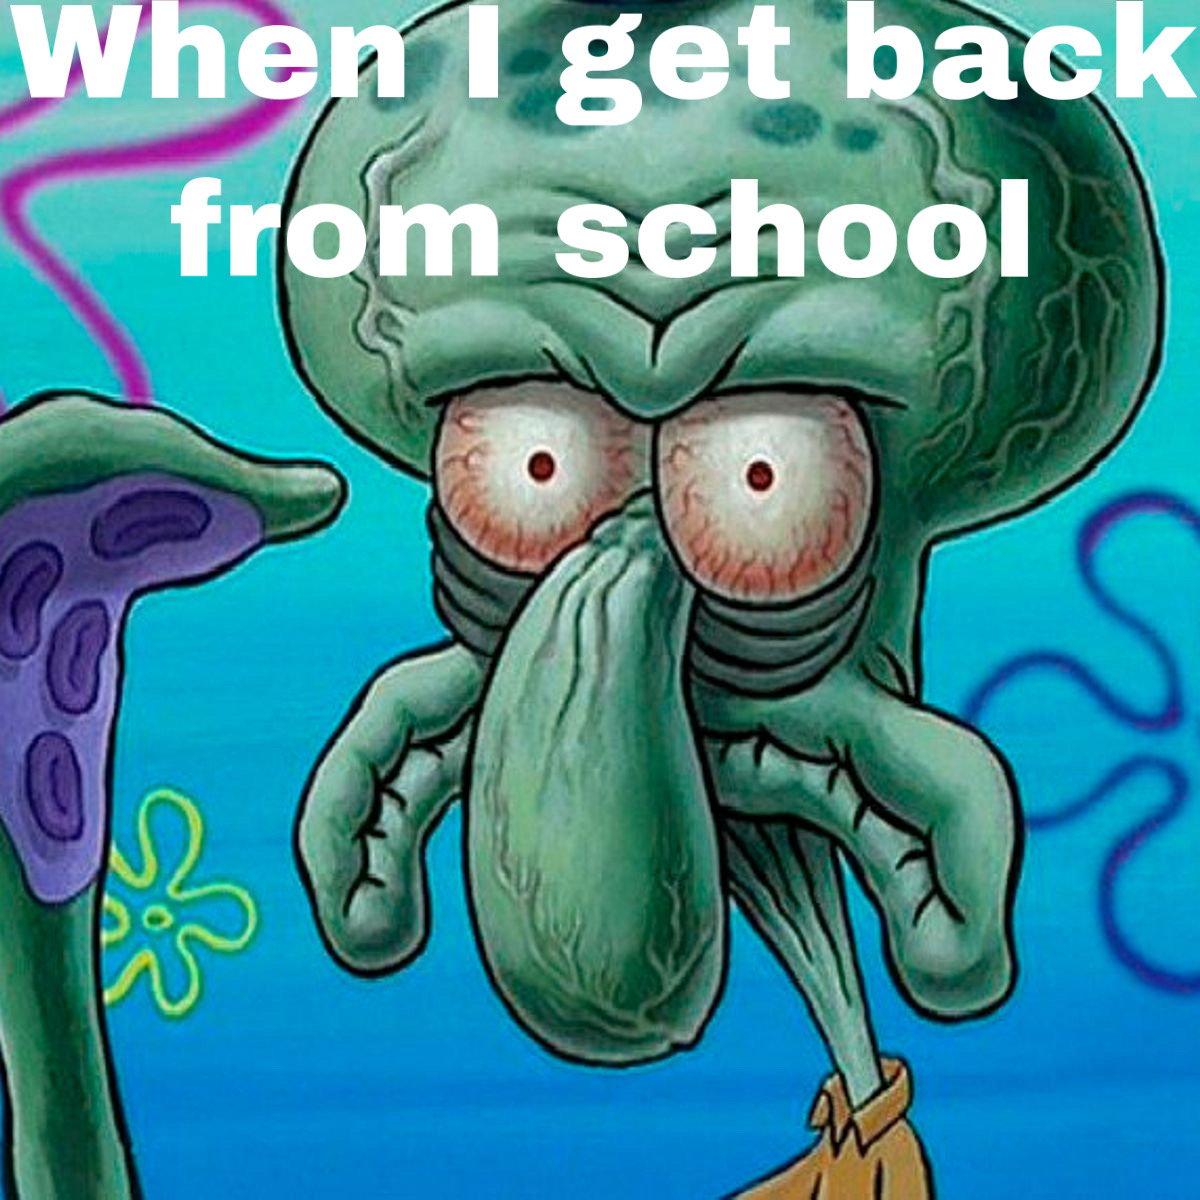 squidward squidwardtentacles image by @spongebobmemers.